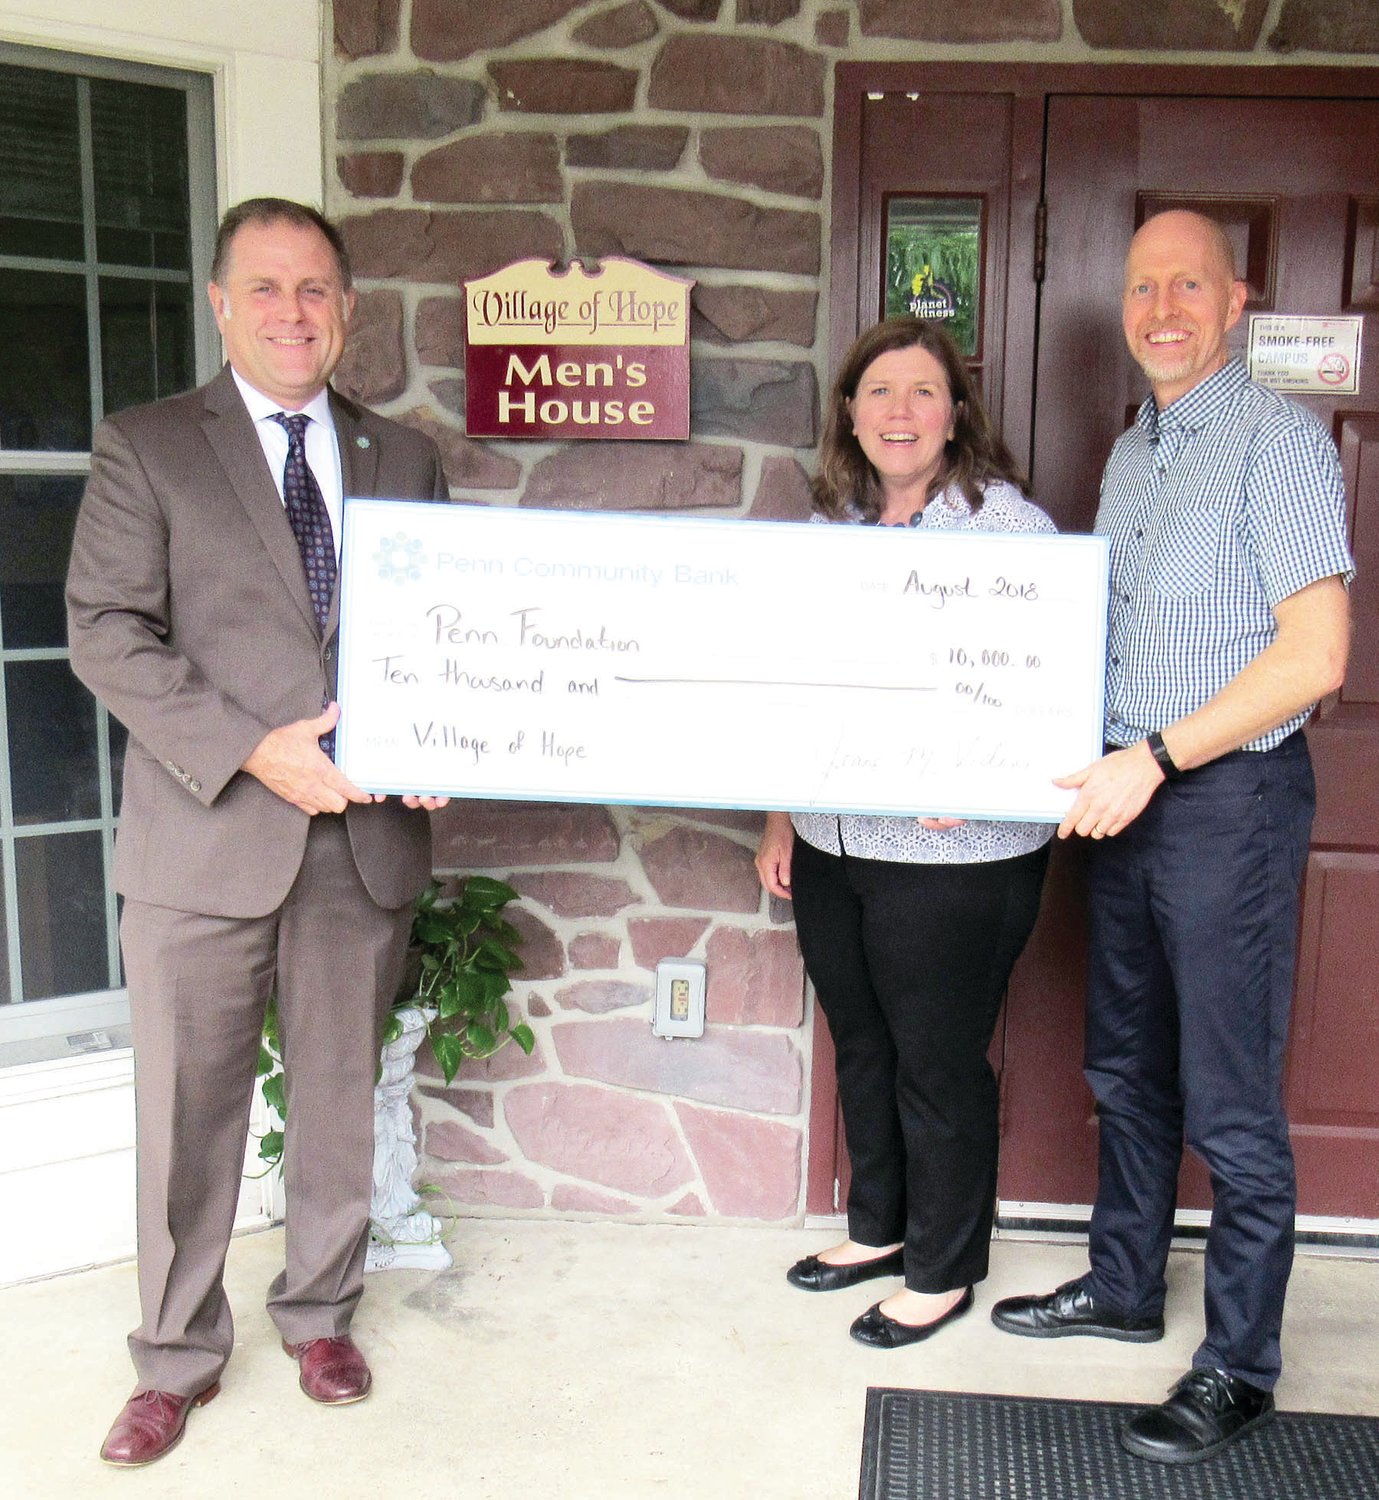 Todd R. Hurley, chief relationship officer at Penn Community Bank, left, presents a check for $10,000 to Jennifer King, director of advancement at Penn Foundation and Don Detweiler, director of the Village of Hope.